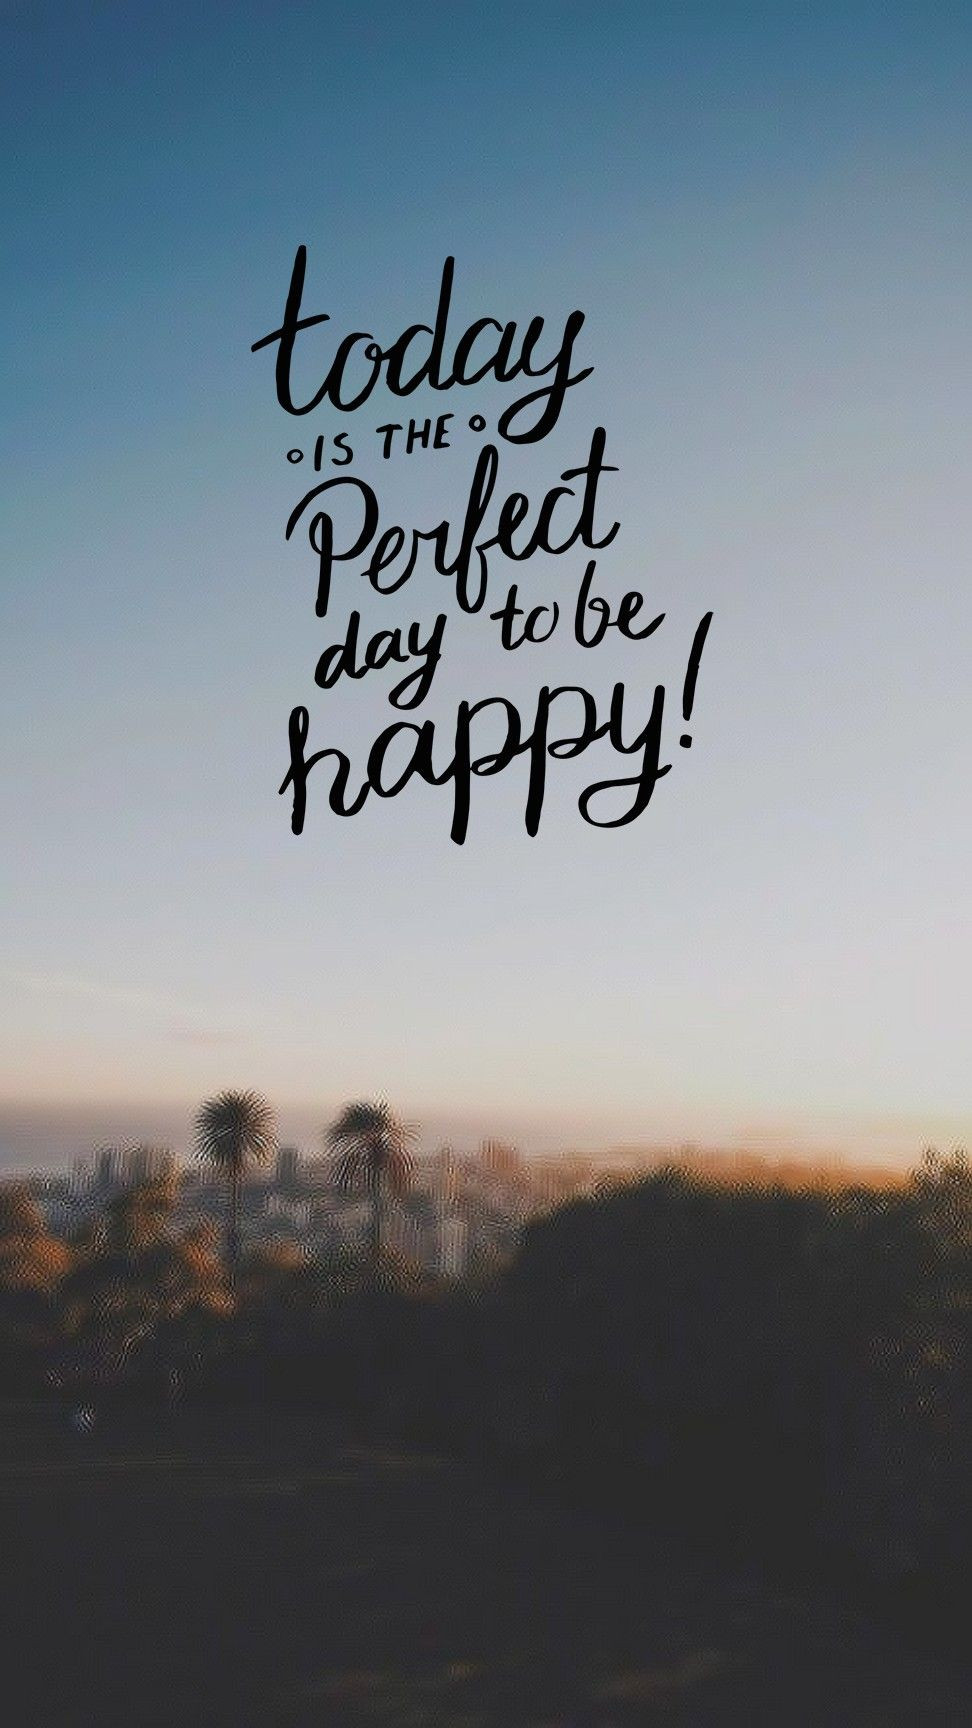 Pinterest Positive Quotes
 Pinterest Sophia Him "Today is the perfect day to be